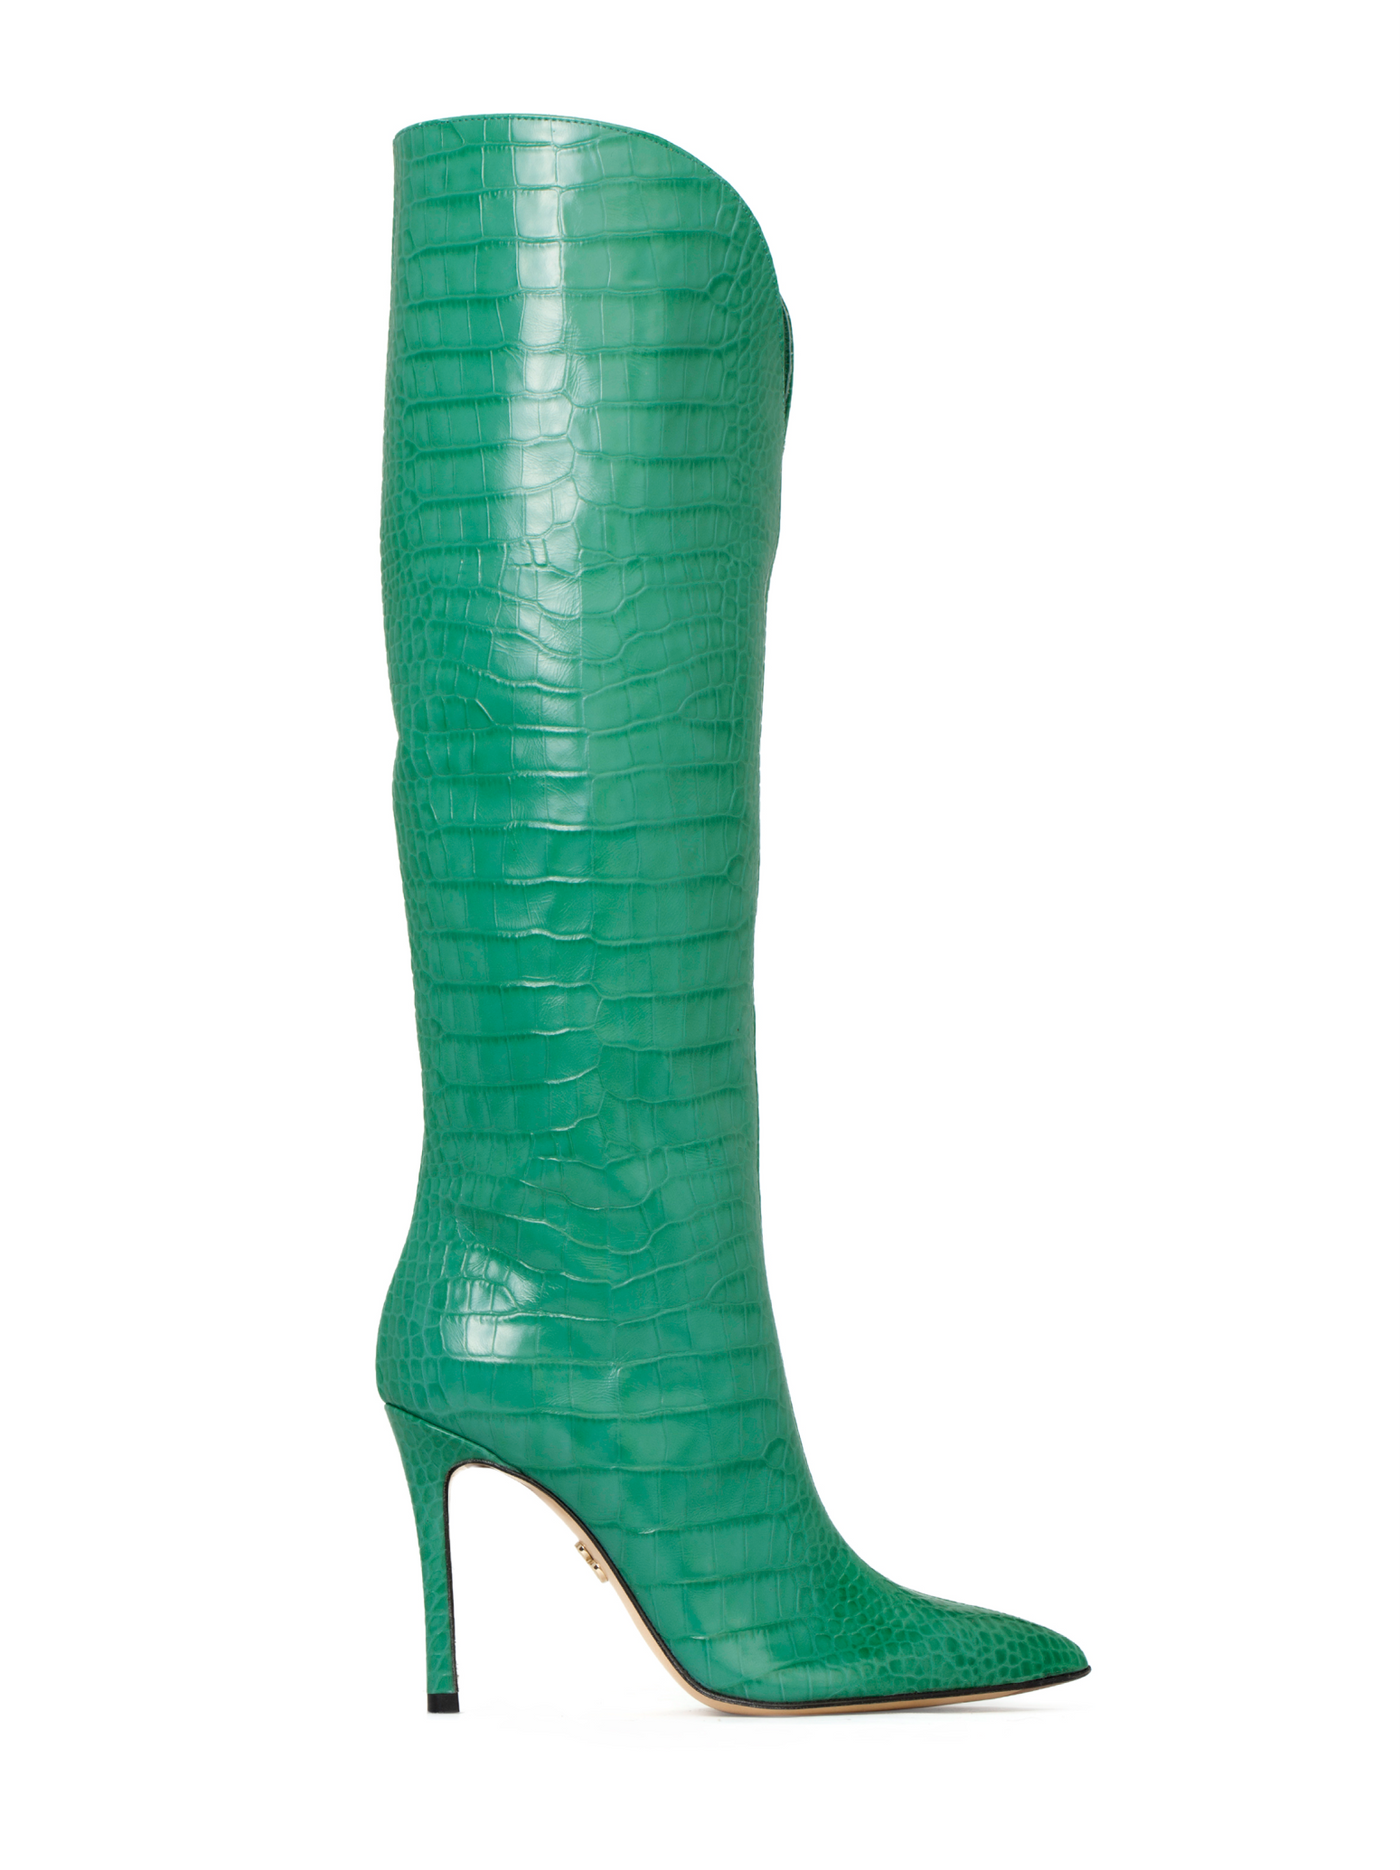 Peyton Knee-High Embossed Leather Stiletto Boot